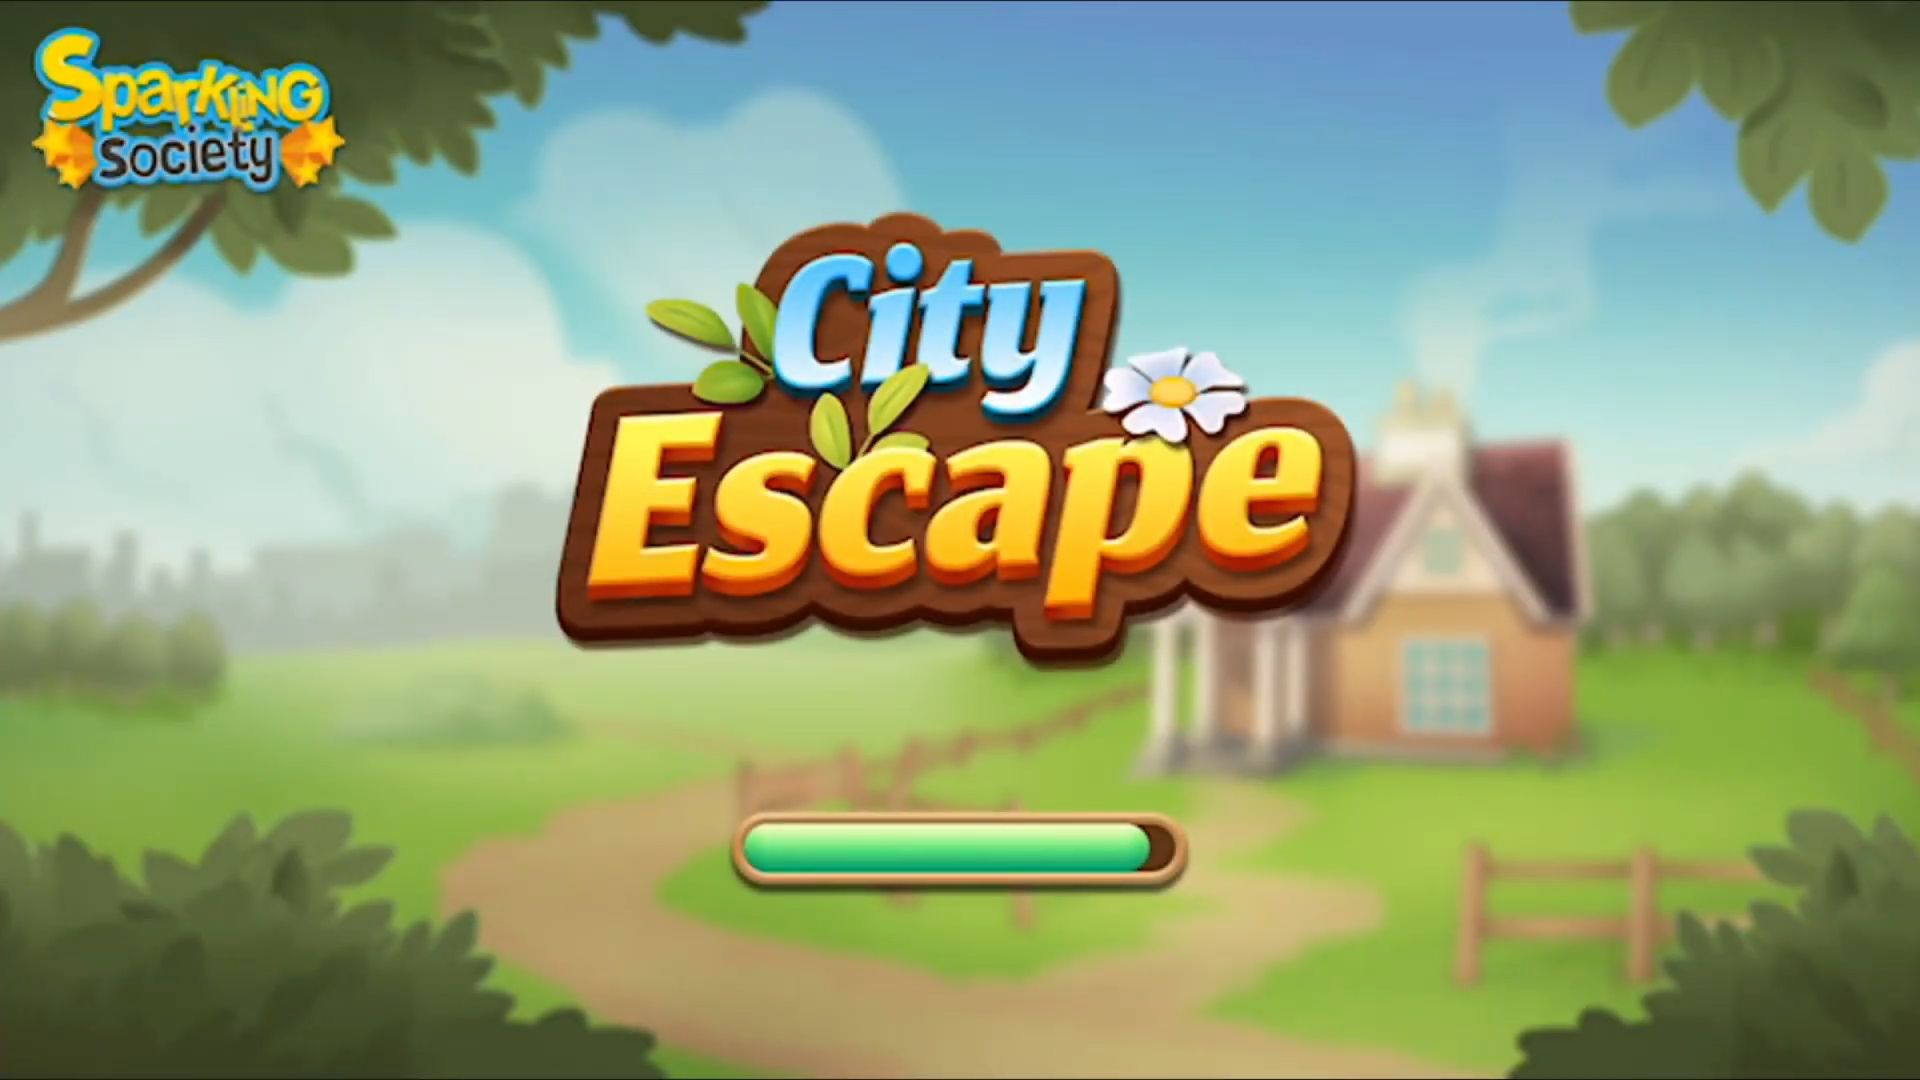 Full version of Android Match 3 game apk City Escape Garden Blast Story for tablet and phone.